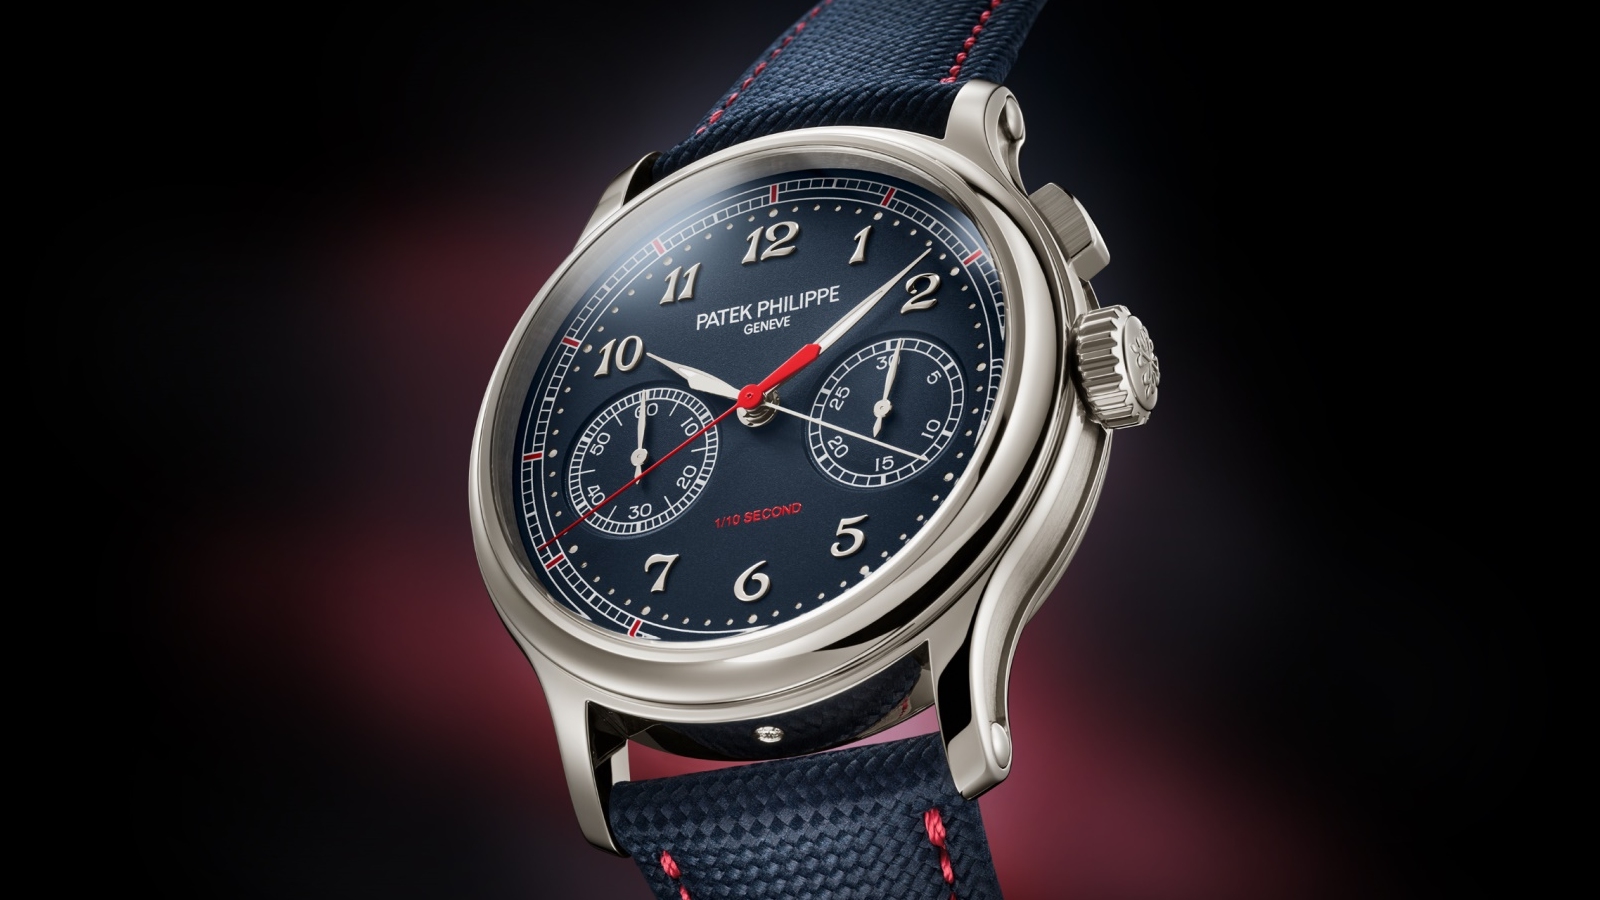 The 1/10th Second Monopusher Chronograph Is Patek Philippe's Most ...